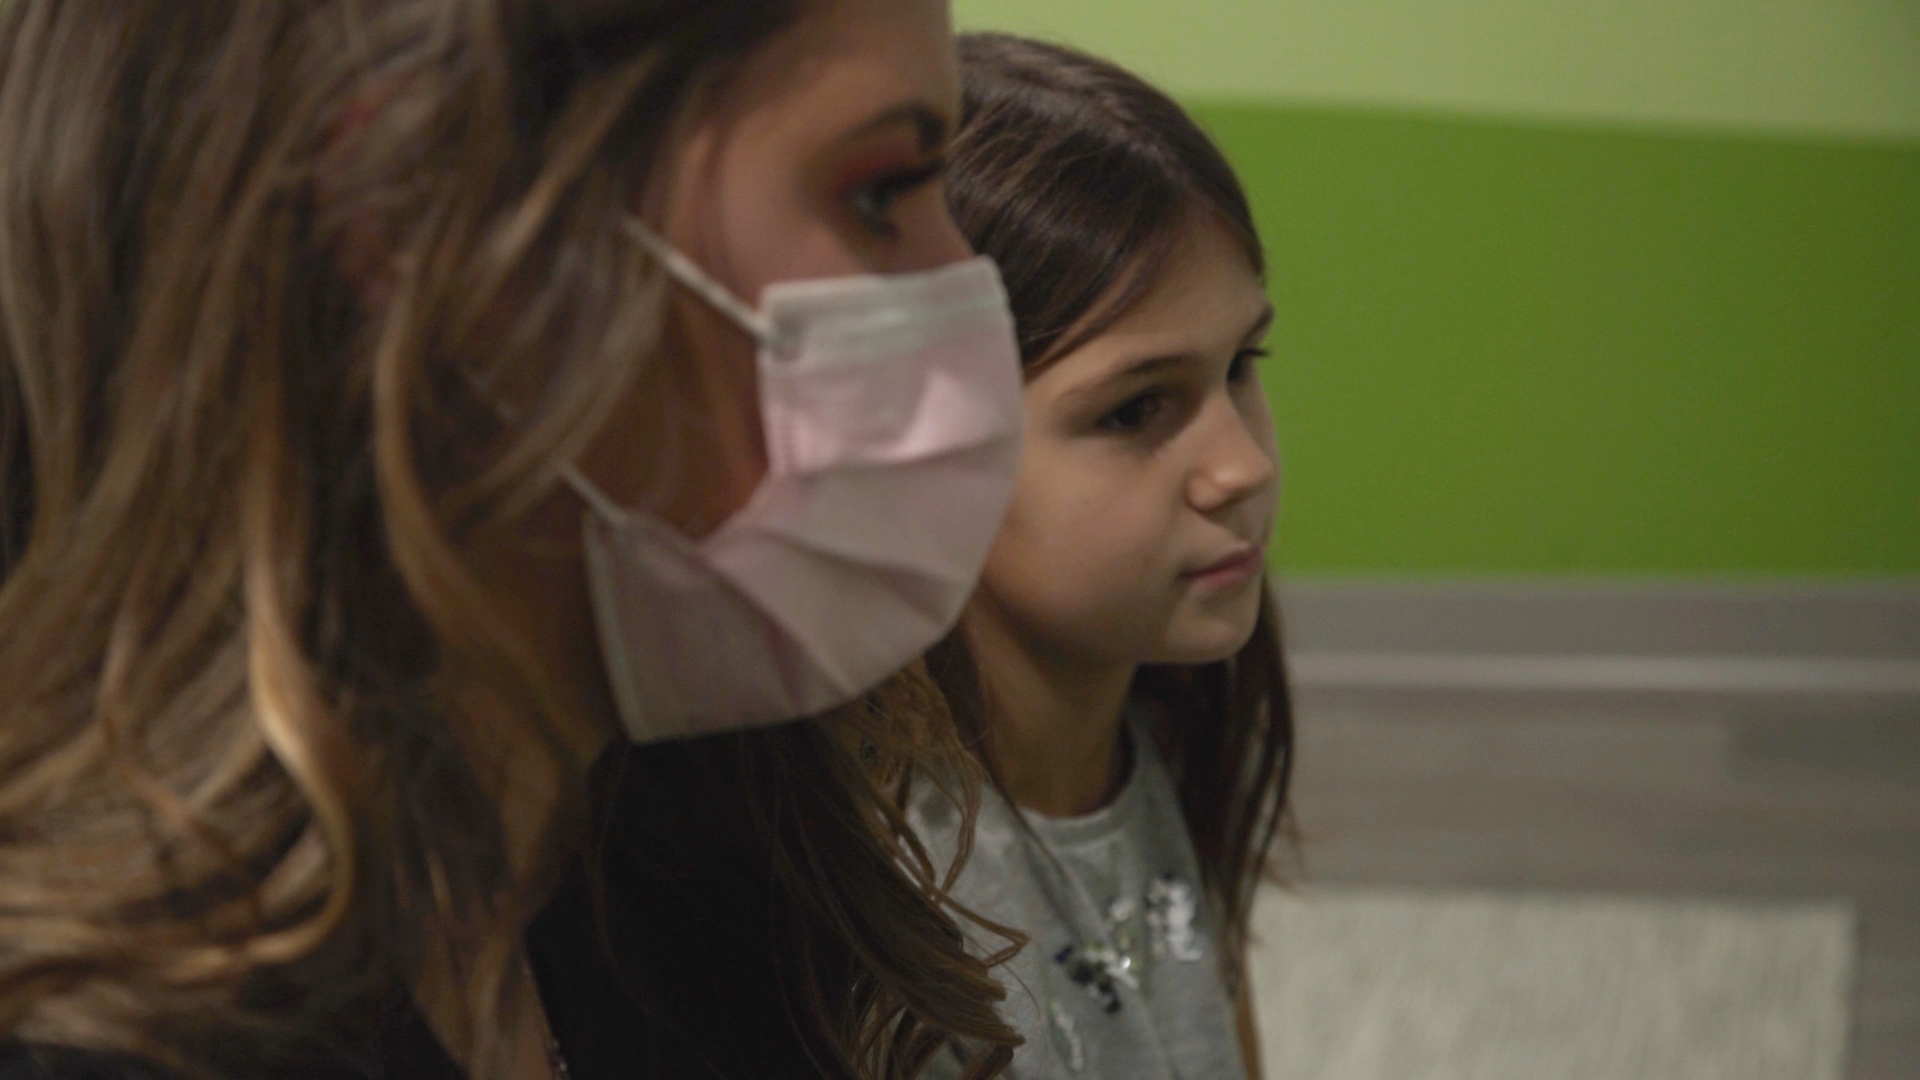 Dr. Carla & Dr. Loria teach kids  how to consistently breathe through the nose.